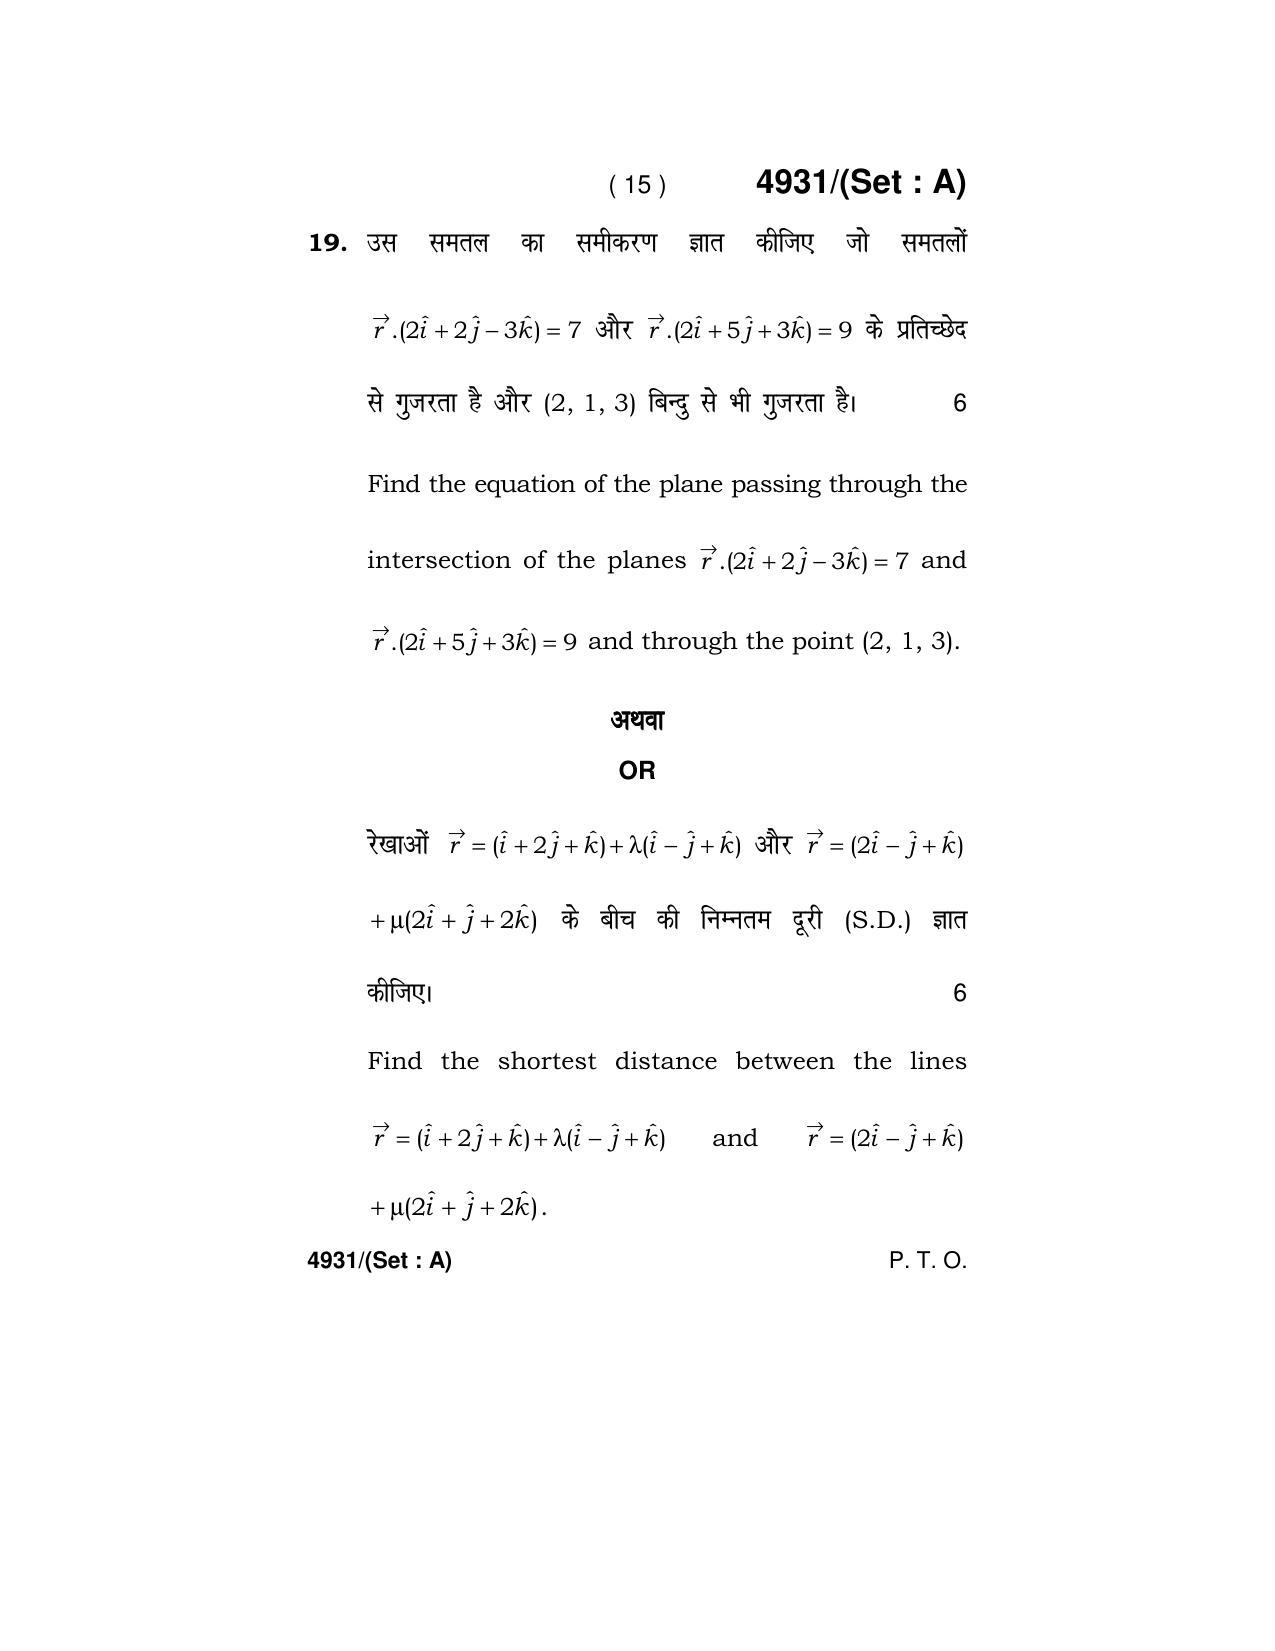 Haryana Board HBSE Class 12 Mathematics 2020 Question Paper - Page 15